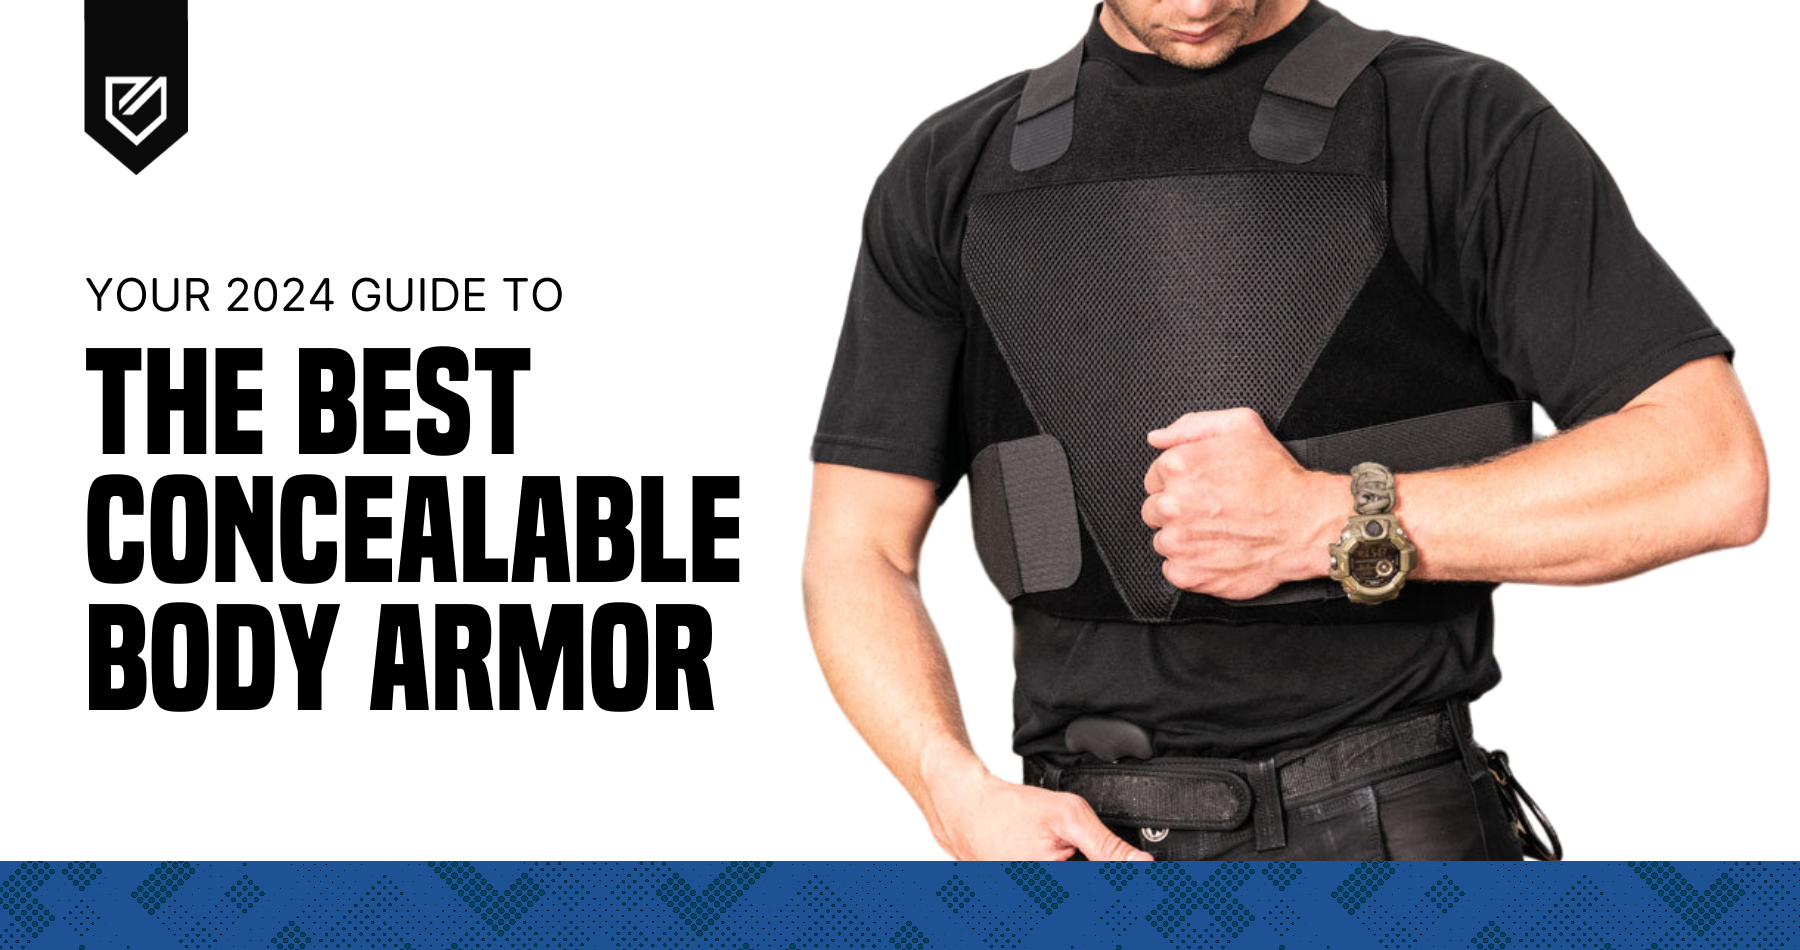 The Best Concealable Body Armor